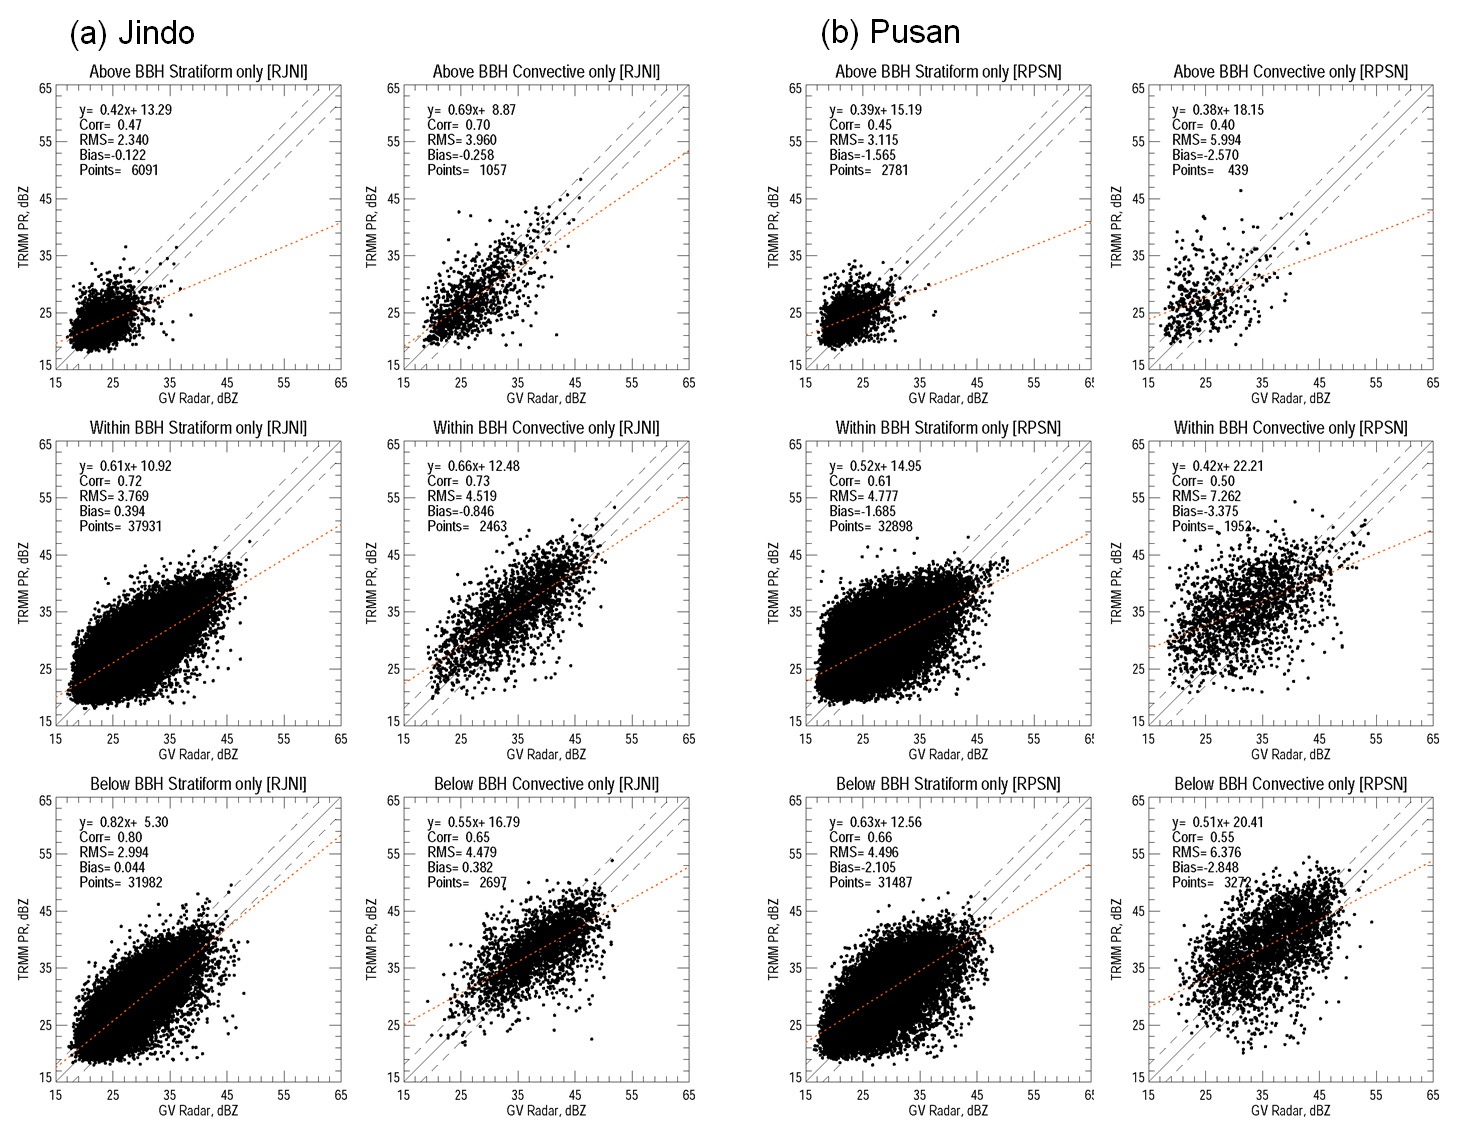 Fig. 4.1.4. Scatterplots the TRMM PR dBZ as GR dBZ at (a) Jindo (RJNI) and (b) Pusan (RPSN) as the above BBH (upper panels), within BBH (middle panels) and below BBH below(lower panels) from August 2006 to May 2008.